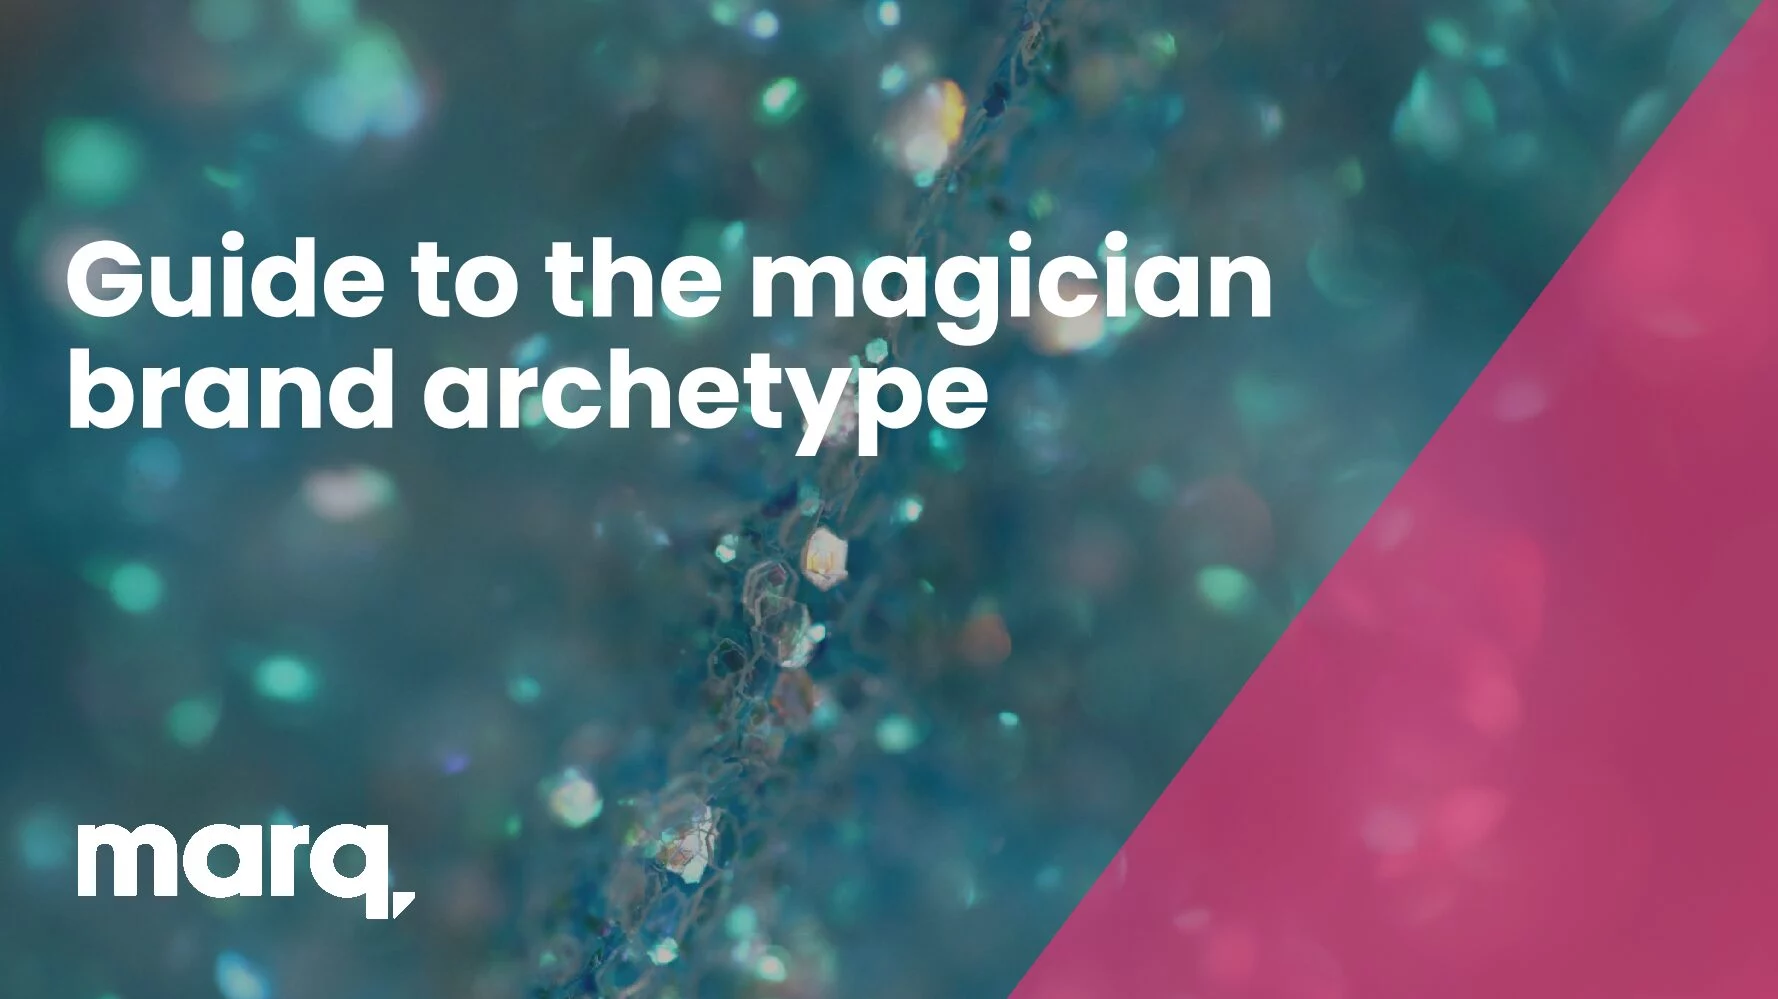 Guide to the magician brand archetype